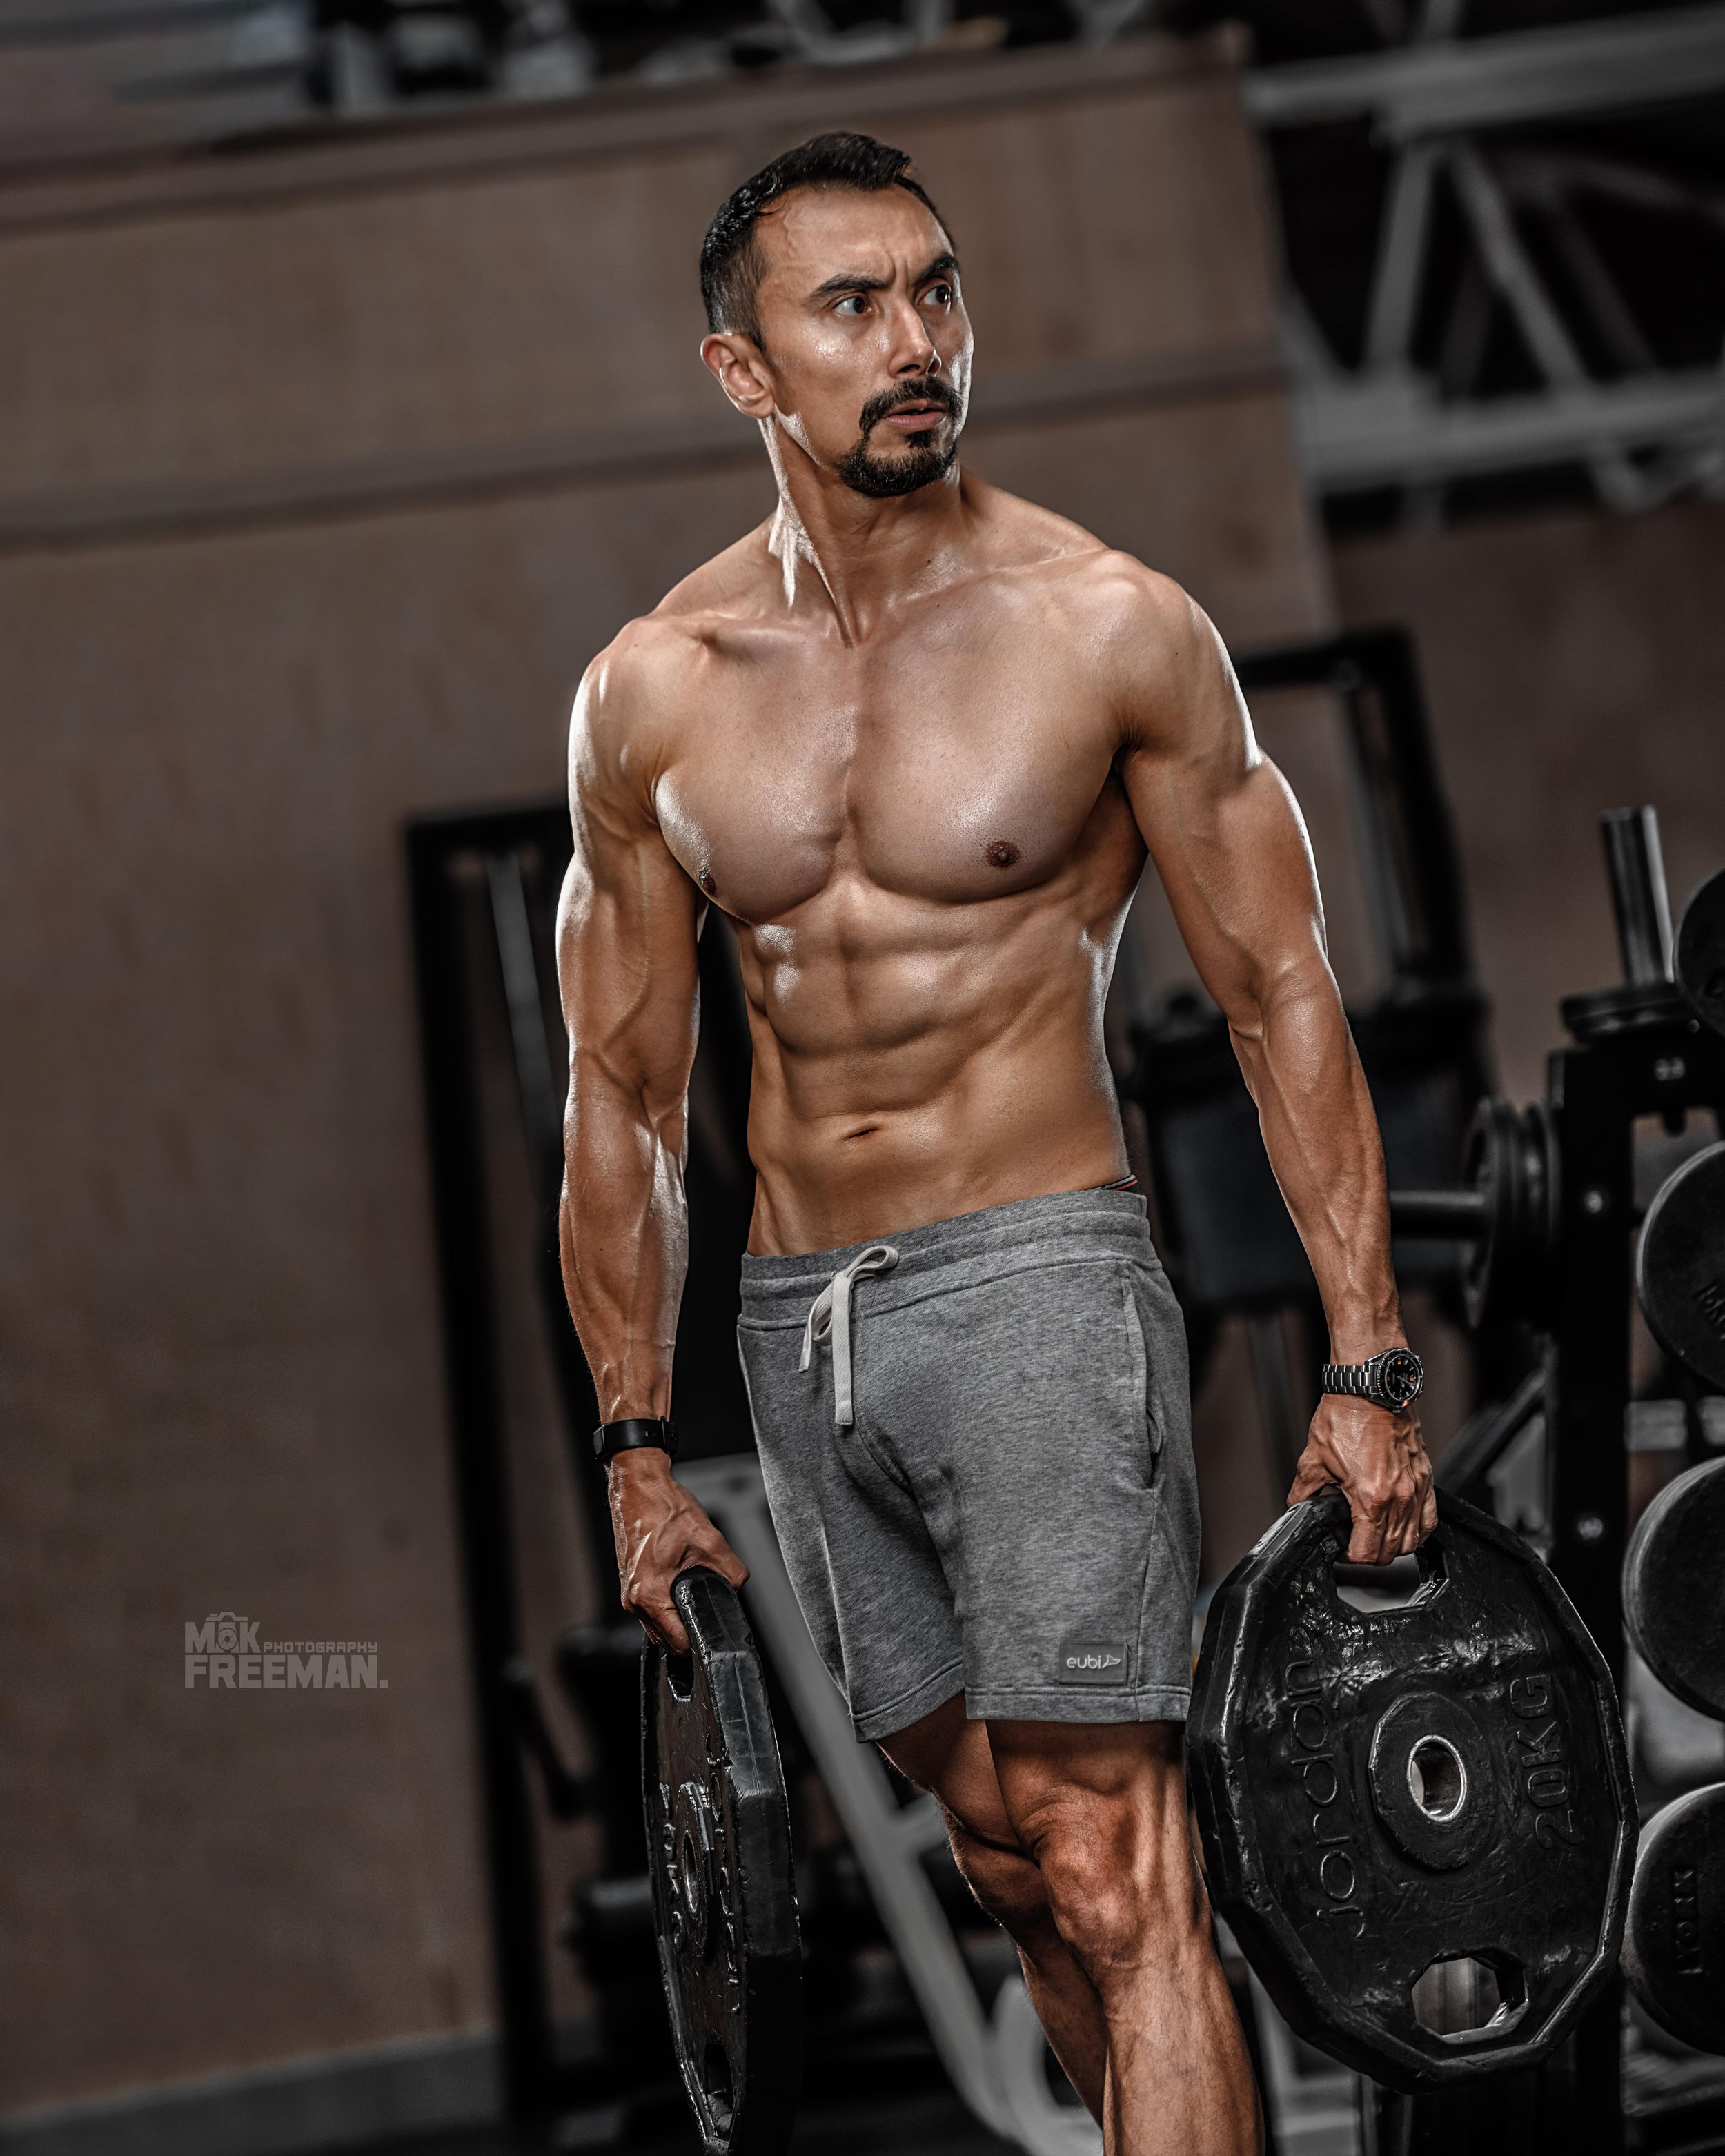 High Quality Fitness Images  Male fitness photography, Gym